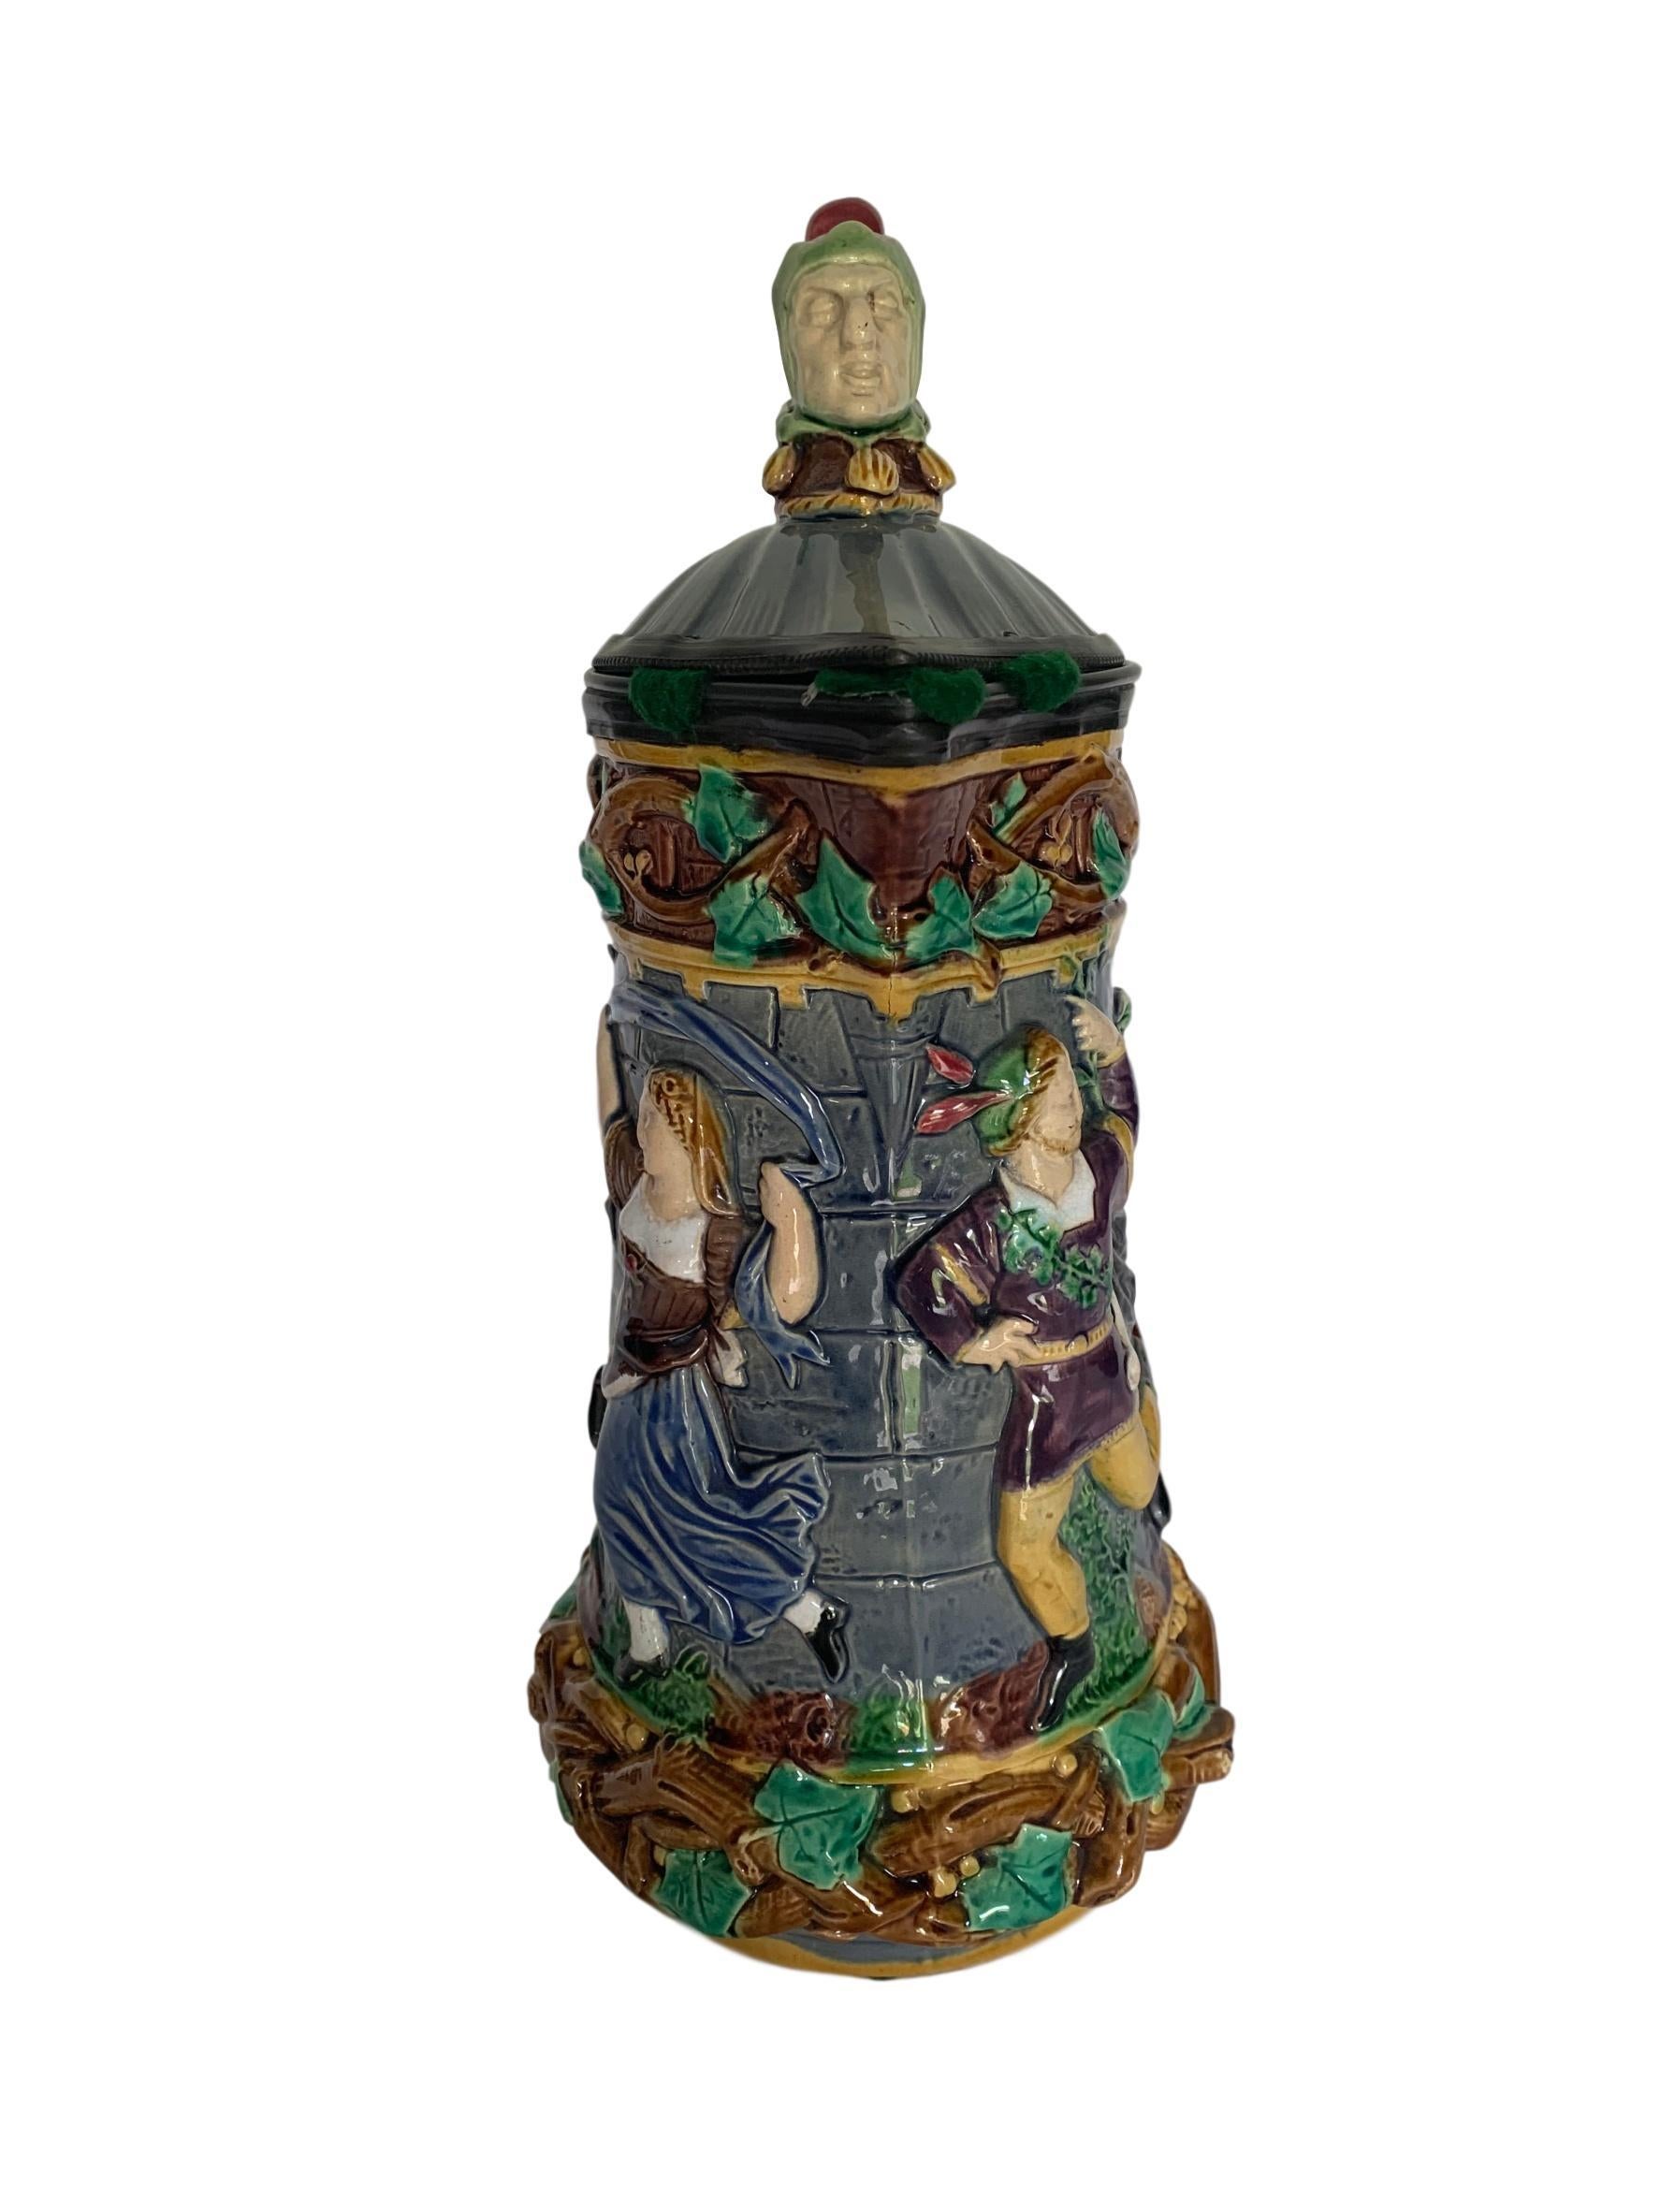 Minton Towered Jug w/ Pewter Lid & Medieval Dancers, English, date code 1876. 

For over 28 years we have been among the Nation’s preeminent specialists in fine antique majolica. 

Literature:
Marilyn G. Karmason and Joan B. Stake, Majolica: A